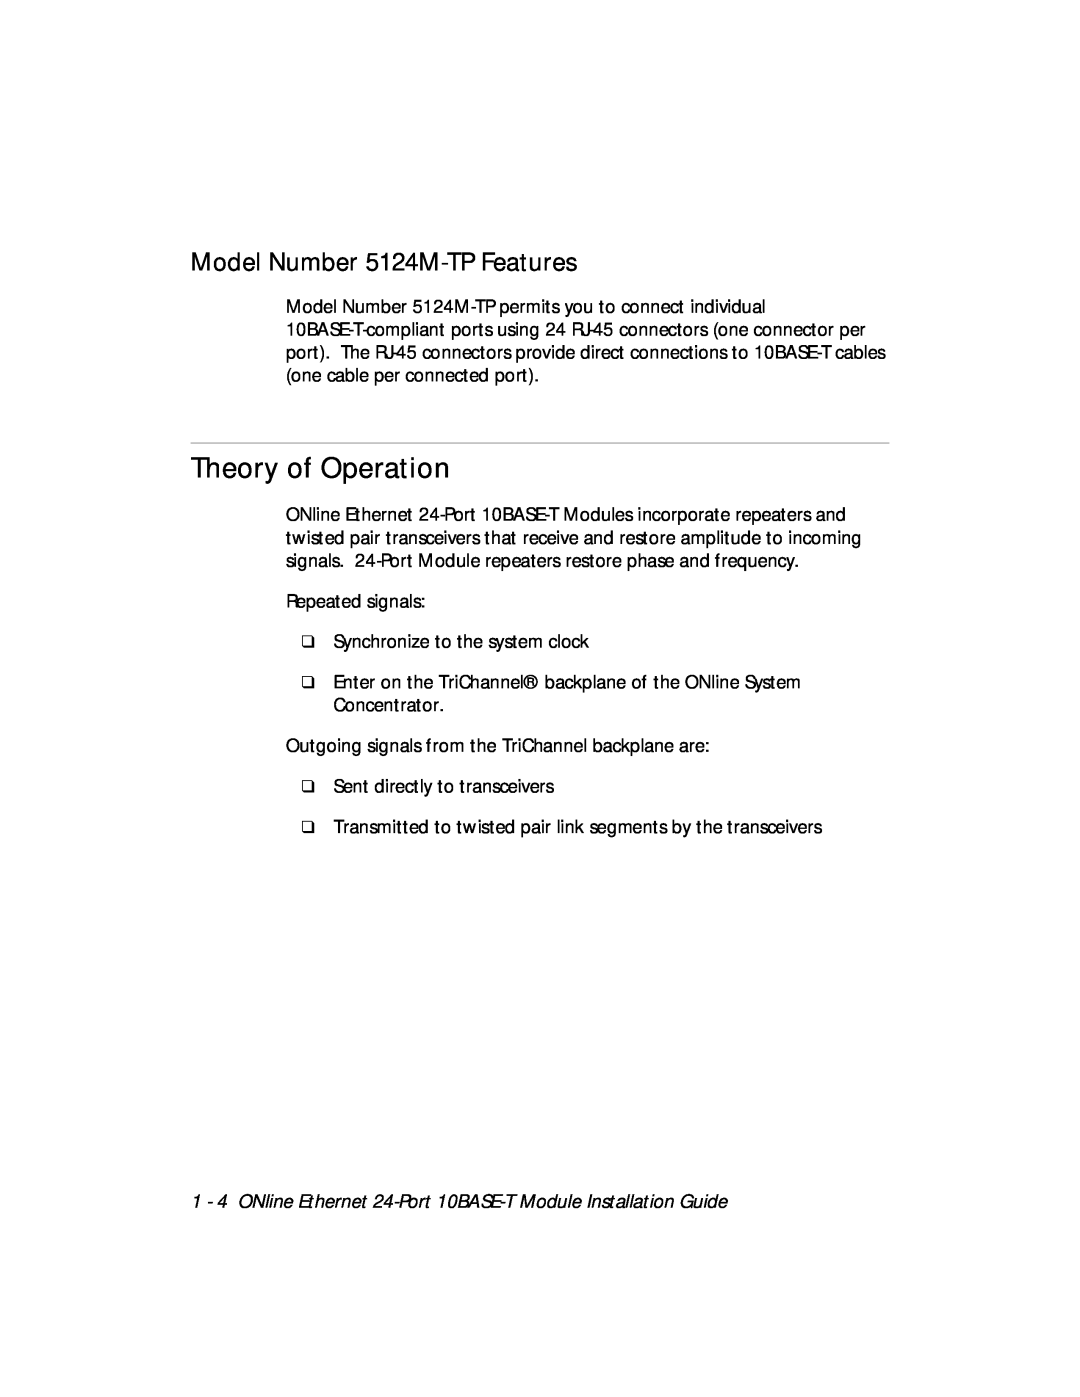 3Com 5124M-TPCL manual Theory of Operation, Model Number 5124M-TP Features 